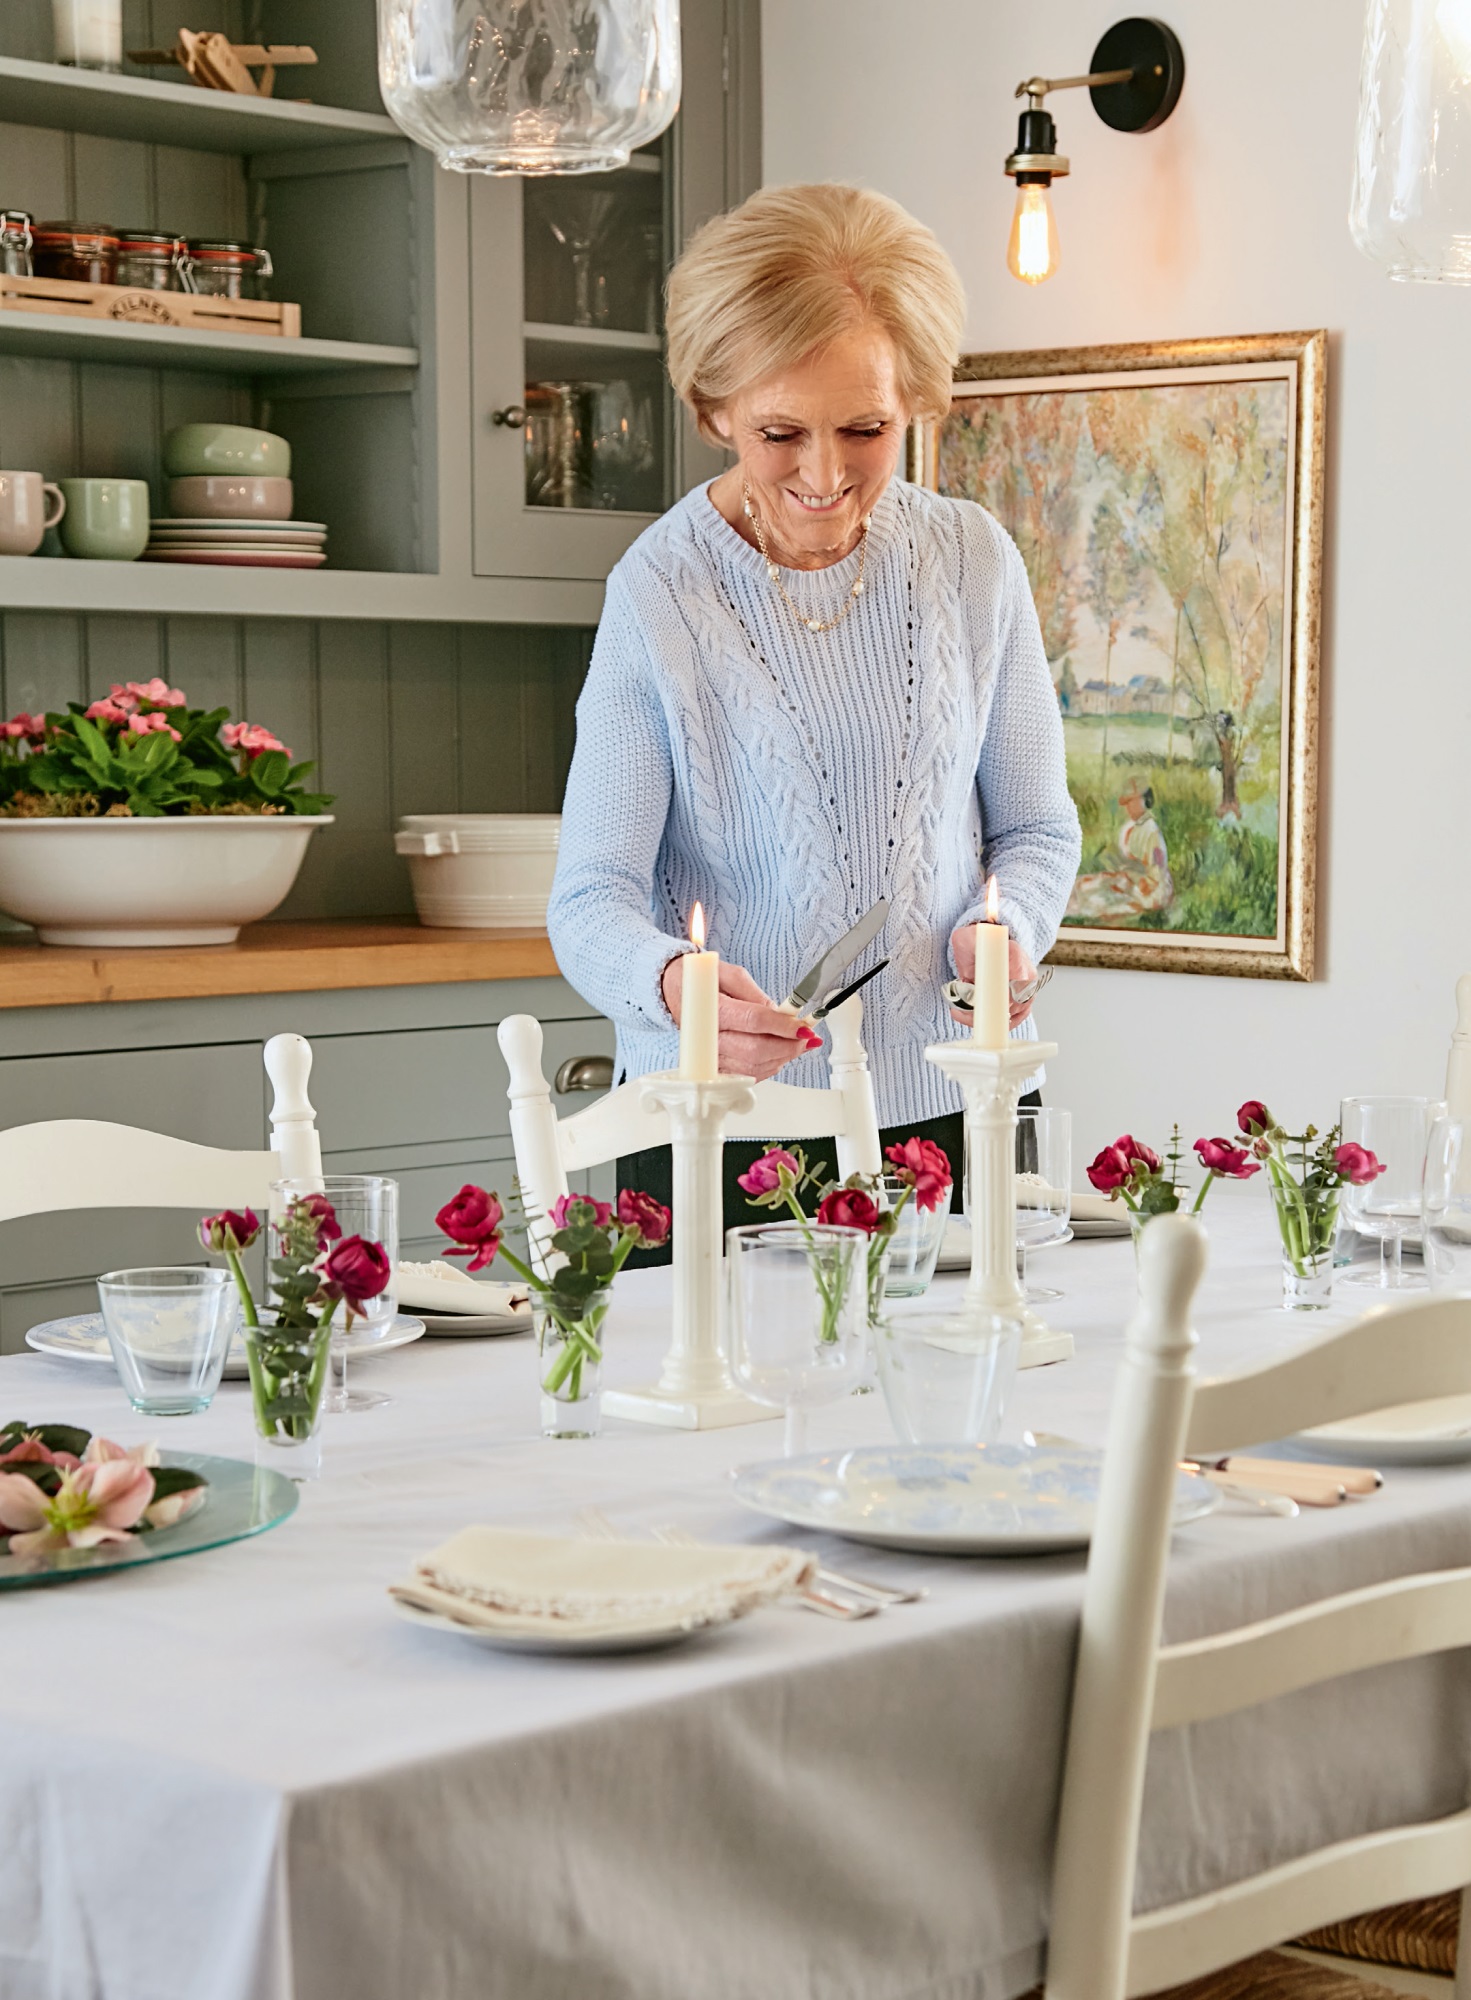 Mary setting a table for a party featured in Hall featuredMary’s Household Tips & Tricks is published on 5th October 2017 by Michael Joseph, Hardback, £20.00. (Georgia Glynn Smith/Michael Joseph/PA) 